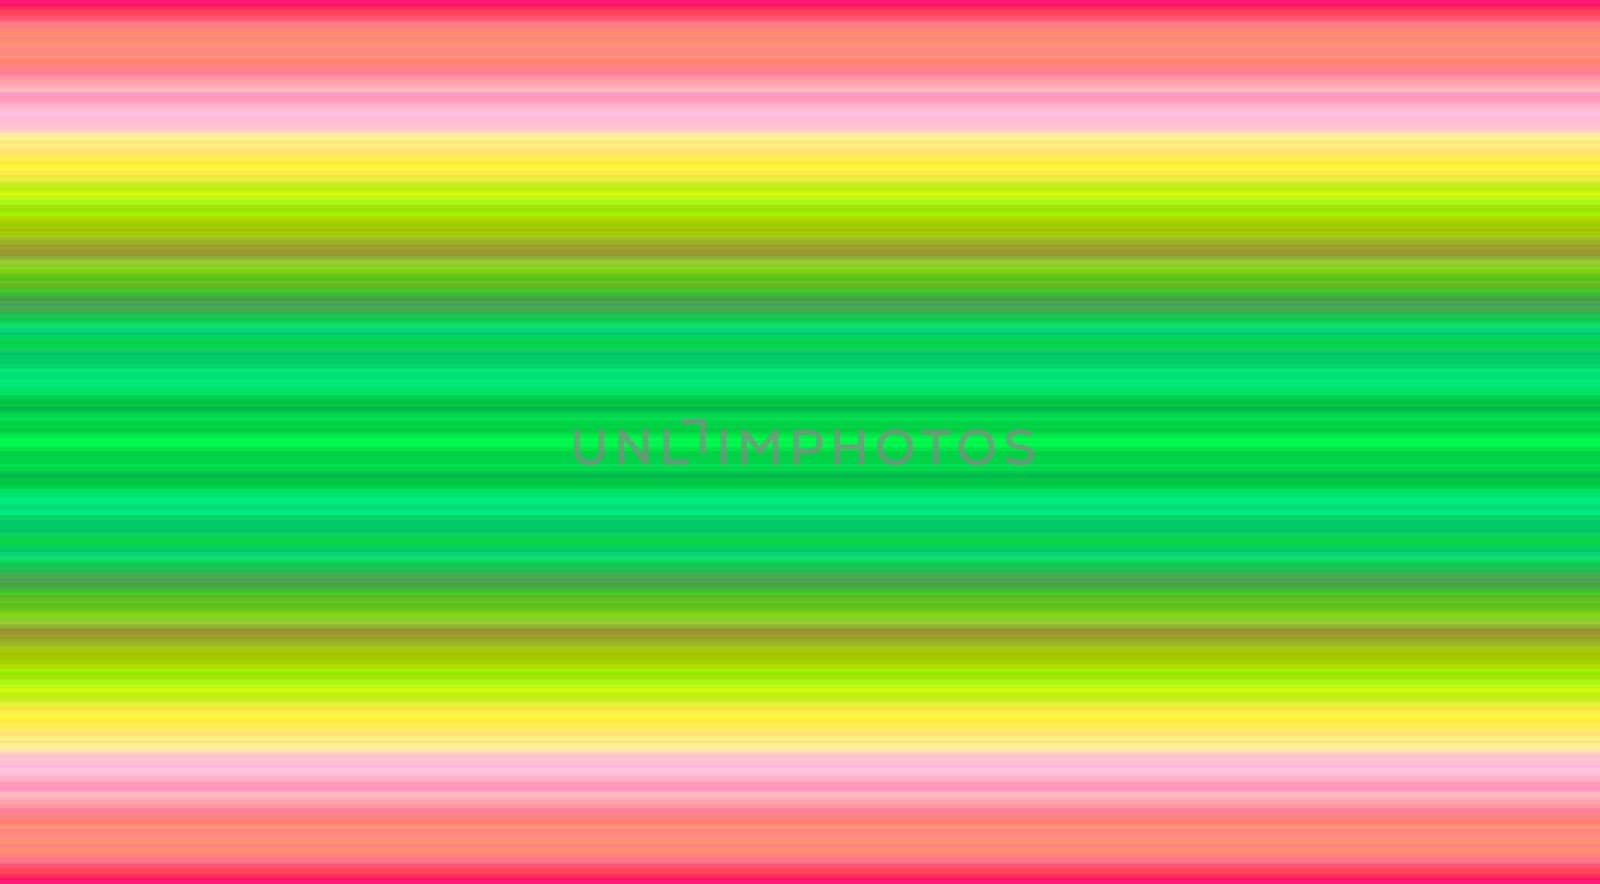 Expressive horizontal creative abstract linear digital illustrations. Digital abstract drawing of light green and pink transverse straight lines